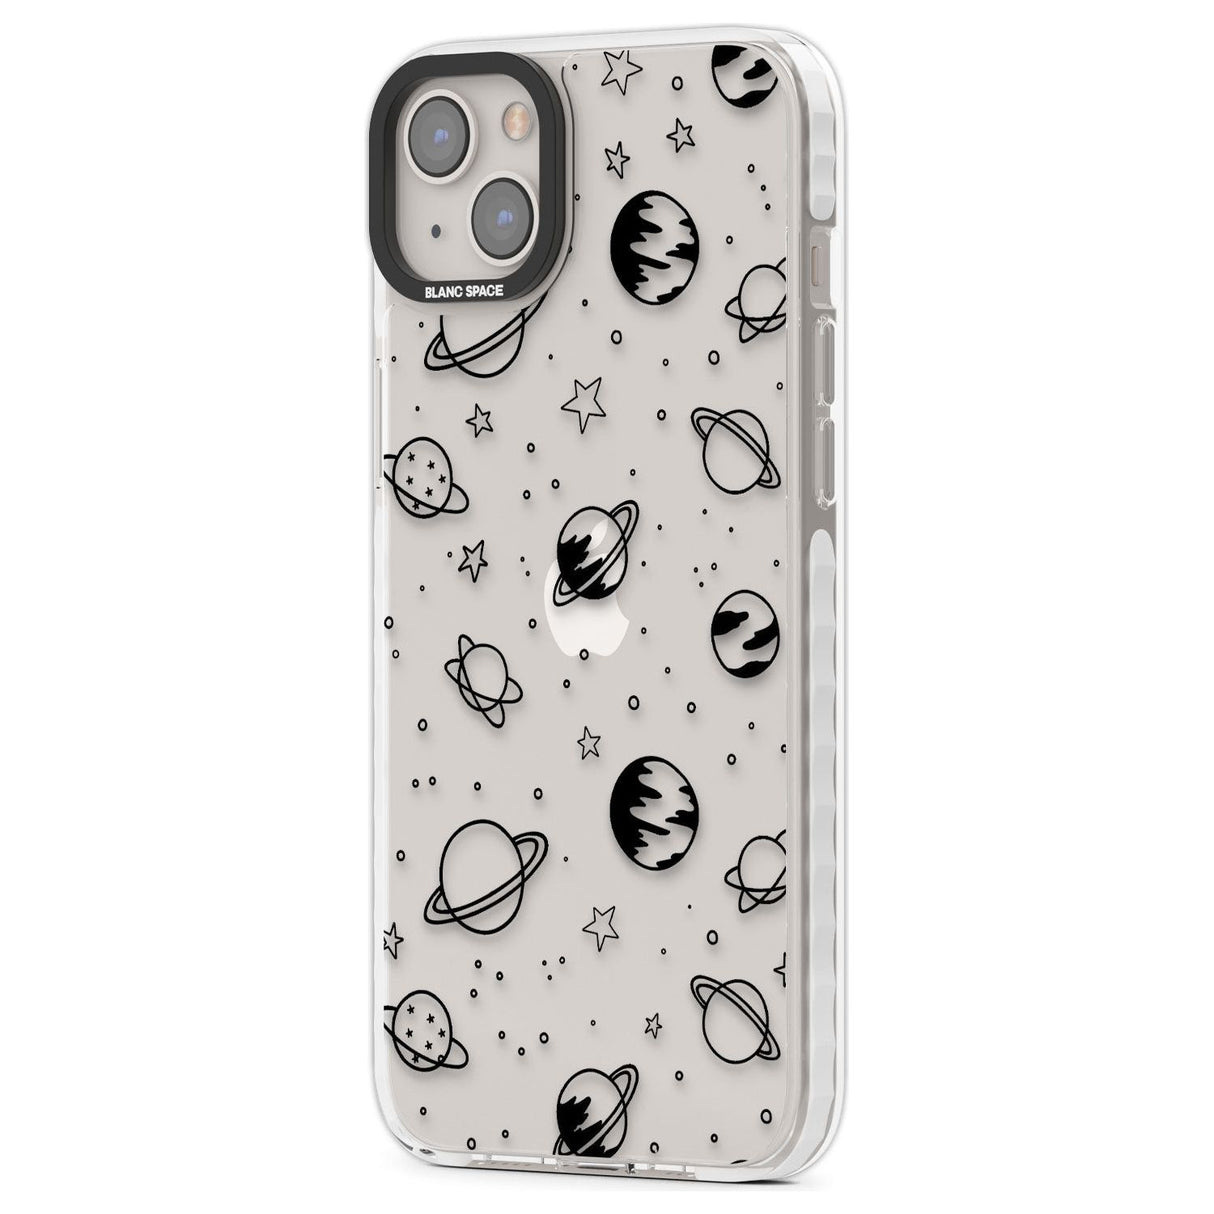 Cosmic Outer Space Design Black on Clear Phone Case iPhone 15 Pro Max / Black Impact Case,iPhone 15 Plus / Black Impact Case,iPhone 15 Pro / Black Impact Case,iPhone 15 / Black Impact Case,iPhone 15 Pro Max / Impact Case,iPhone 15 Plus / Impact Case,iPhone 15 Pro / Impact Case,iPhone 15 / Impact Case,iPhone 15 Pro Max / Magsafe Black Impact Case,iPhone 15 Plus / Magsafe Black Impact Case,iPhone 15 Pro / Magsafe Black Impact Case,iPhone 15 / Magsafe Black Impact Case,iPhone 14 Pro Max / Black Impact Case,iPh